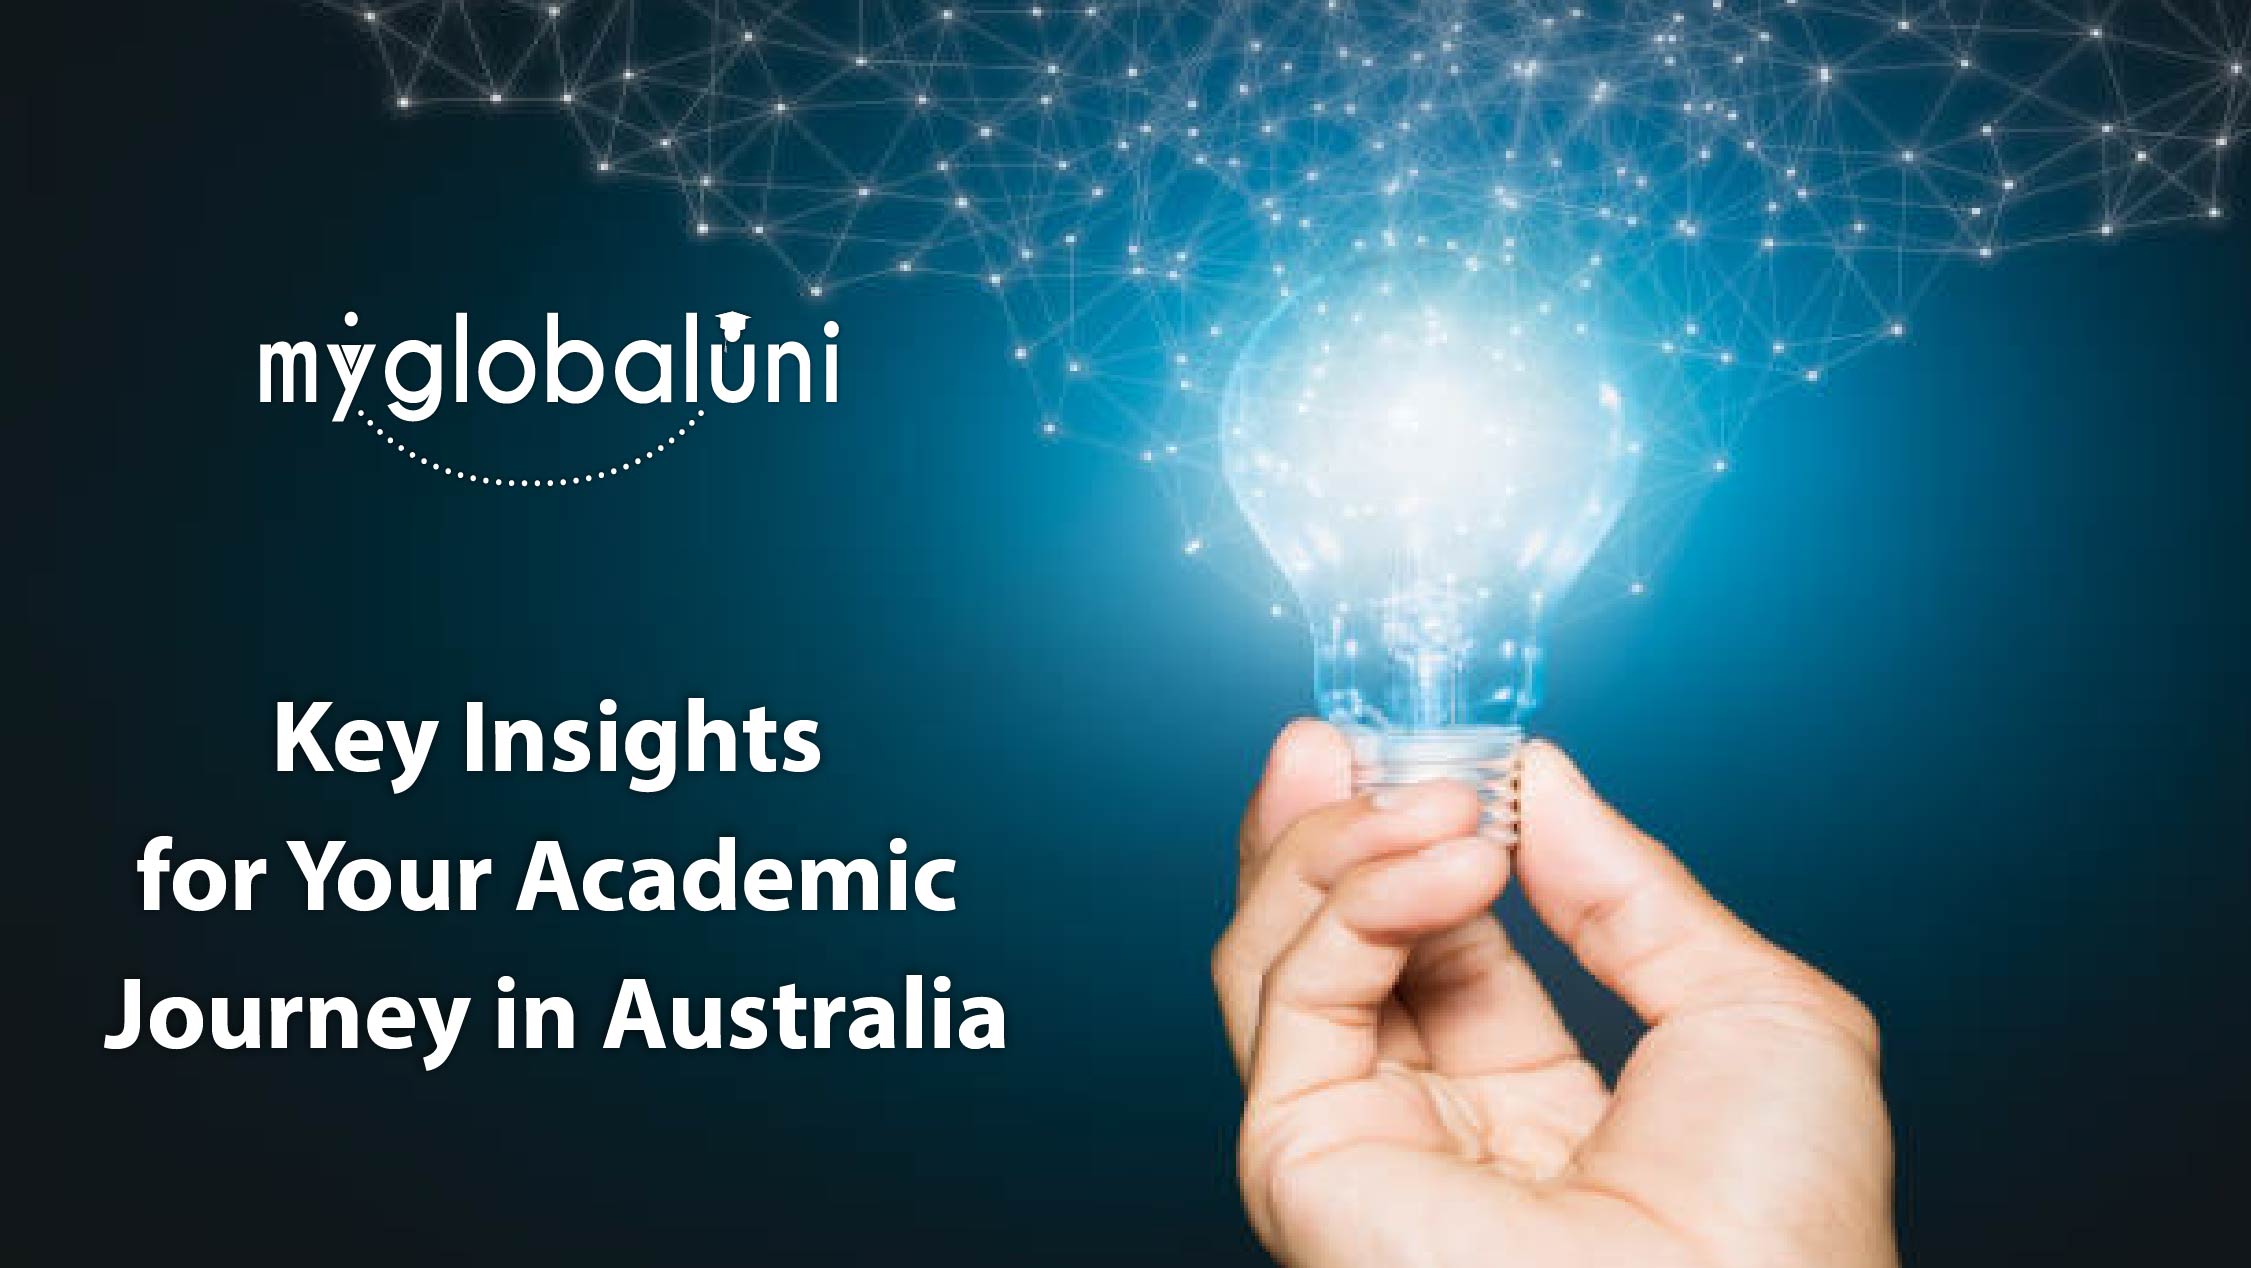 Key Insights for Your Academic Journey in Australia